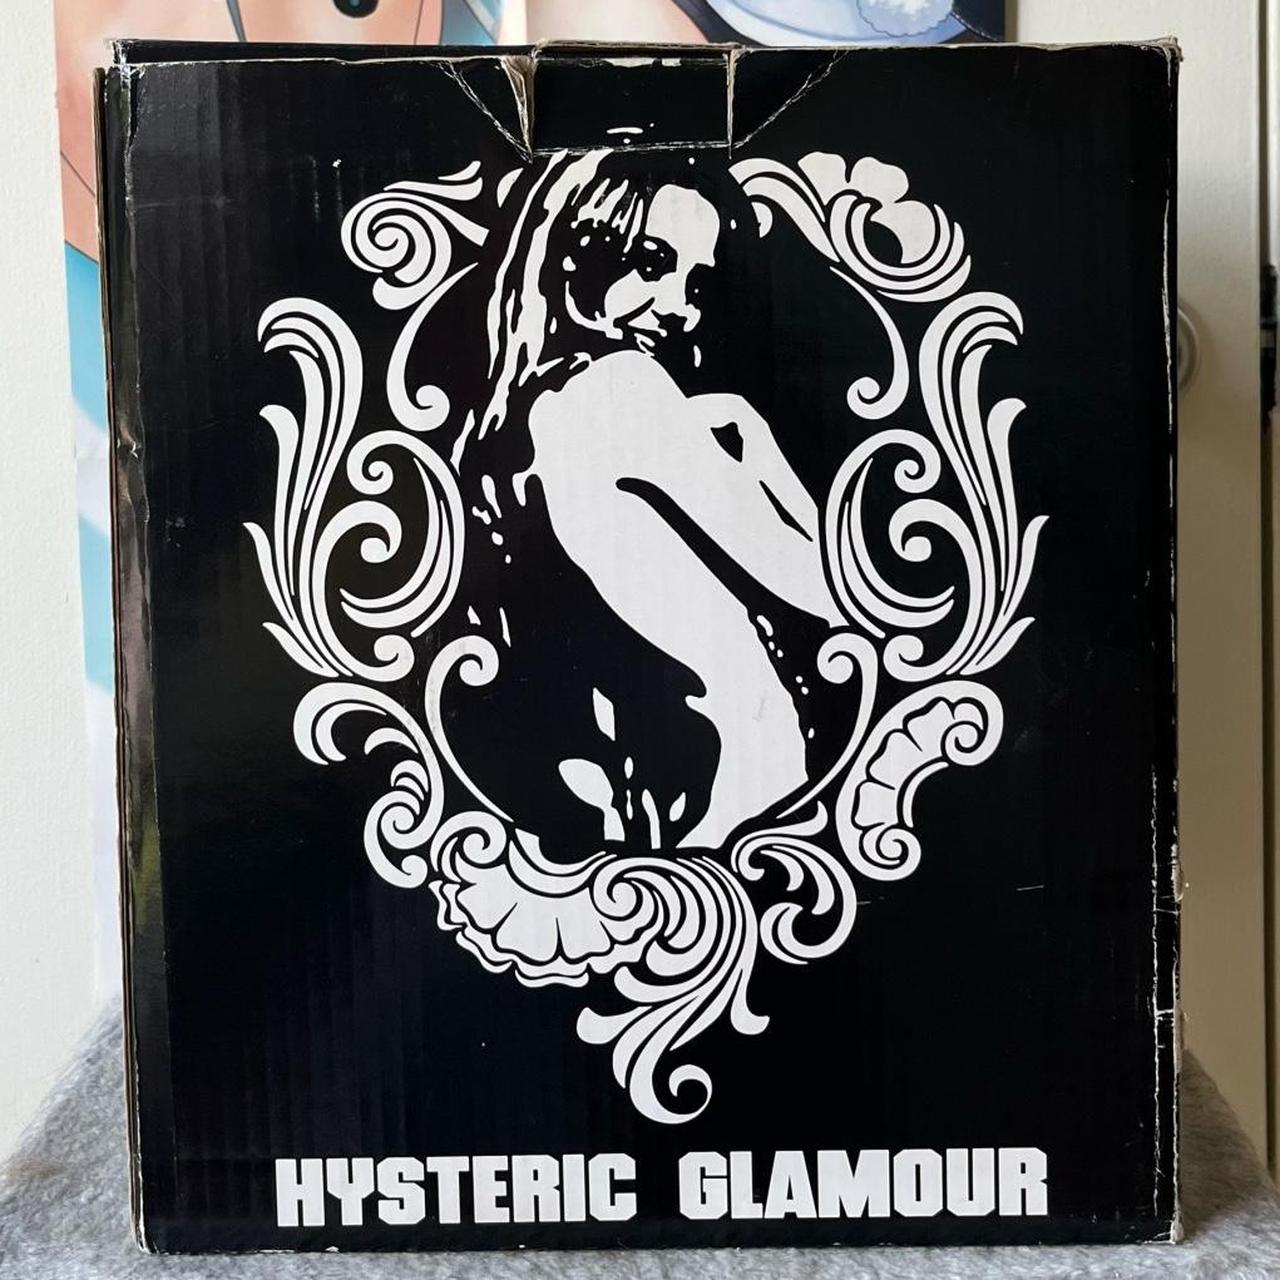 Hysteric Glamour Home, New & Used